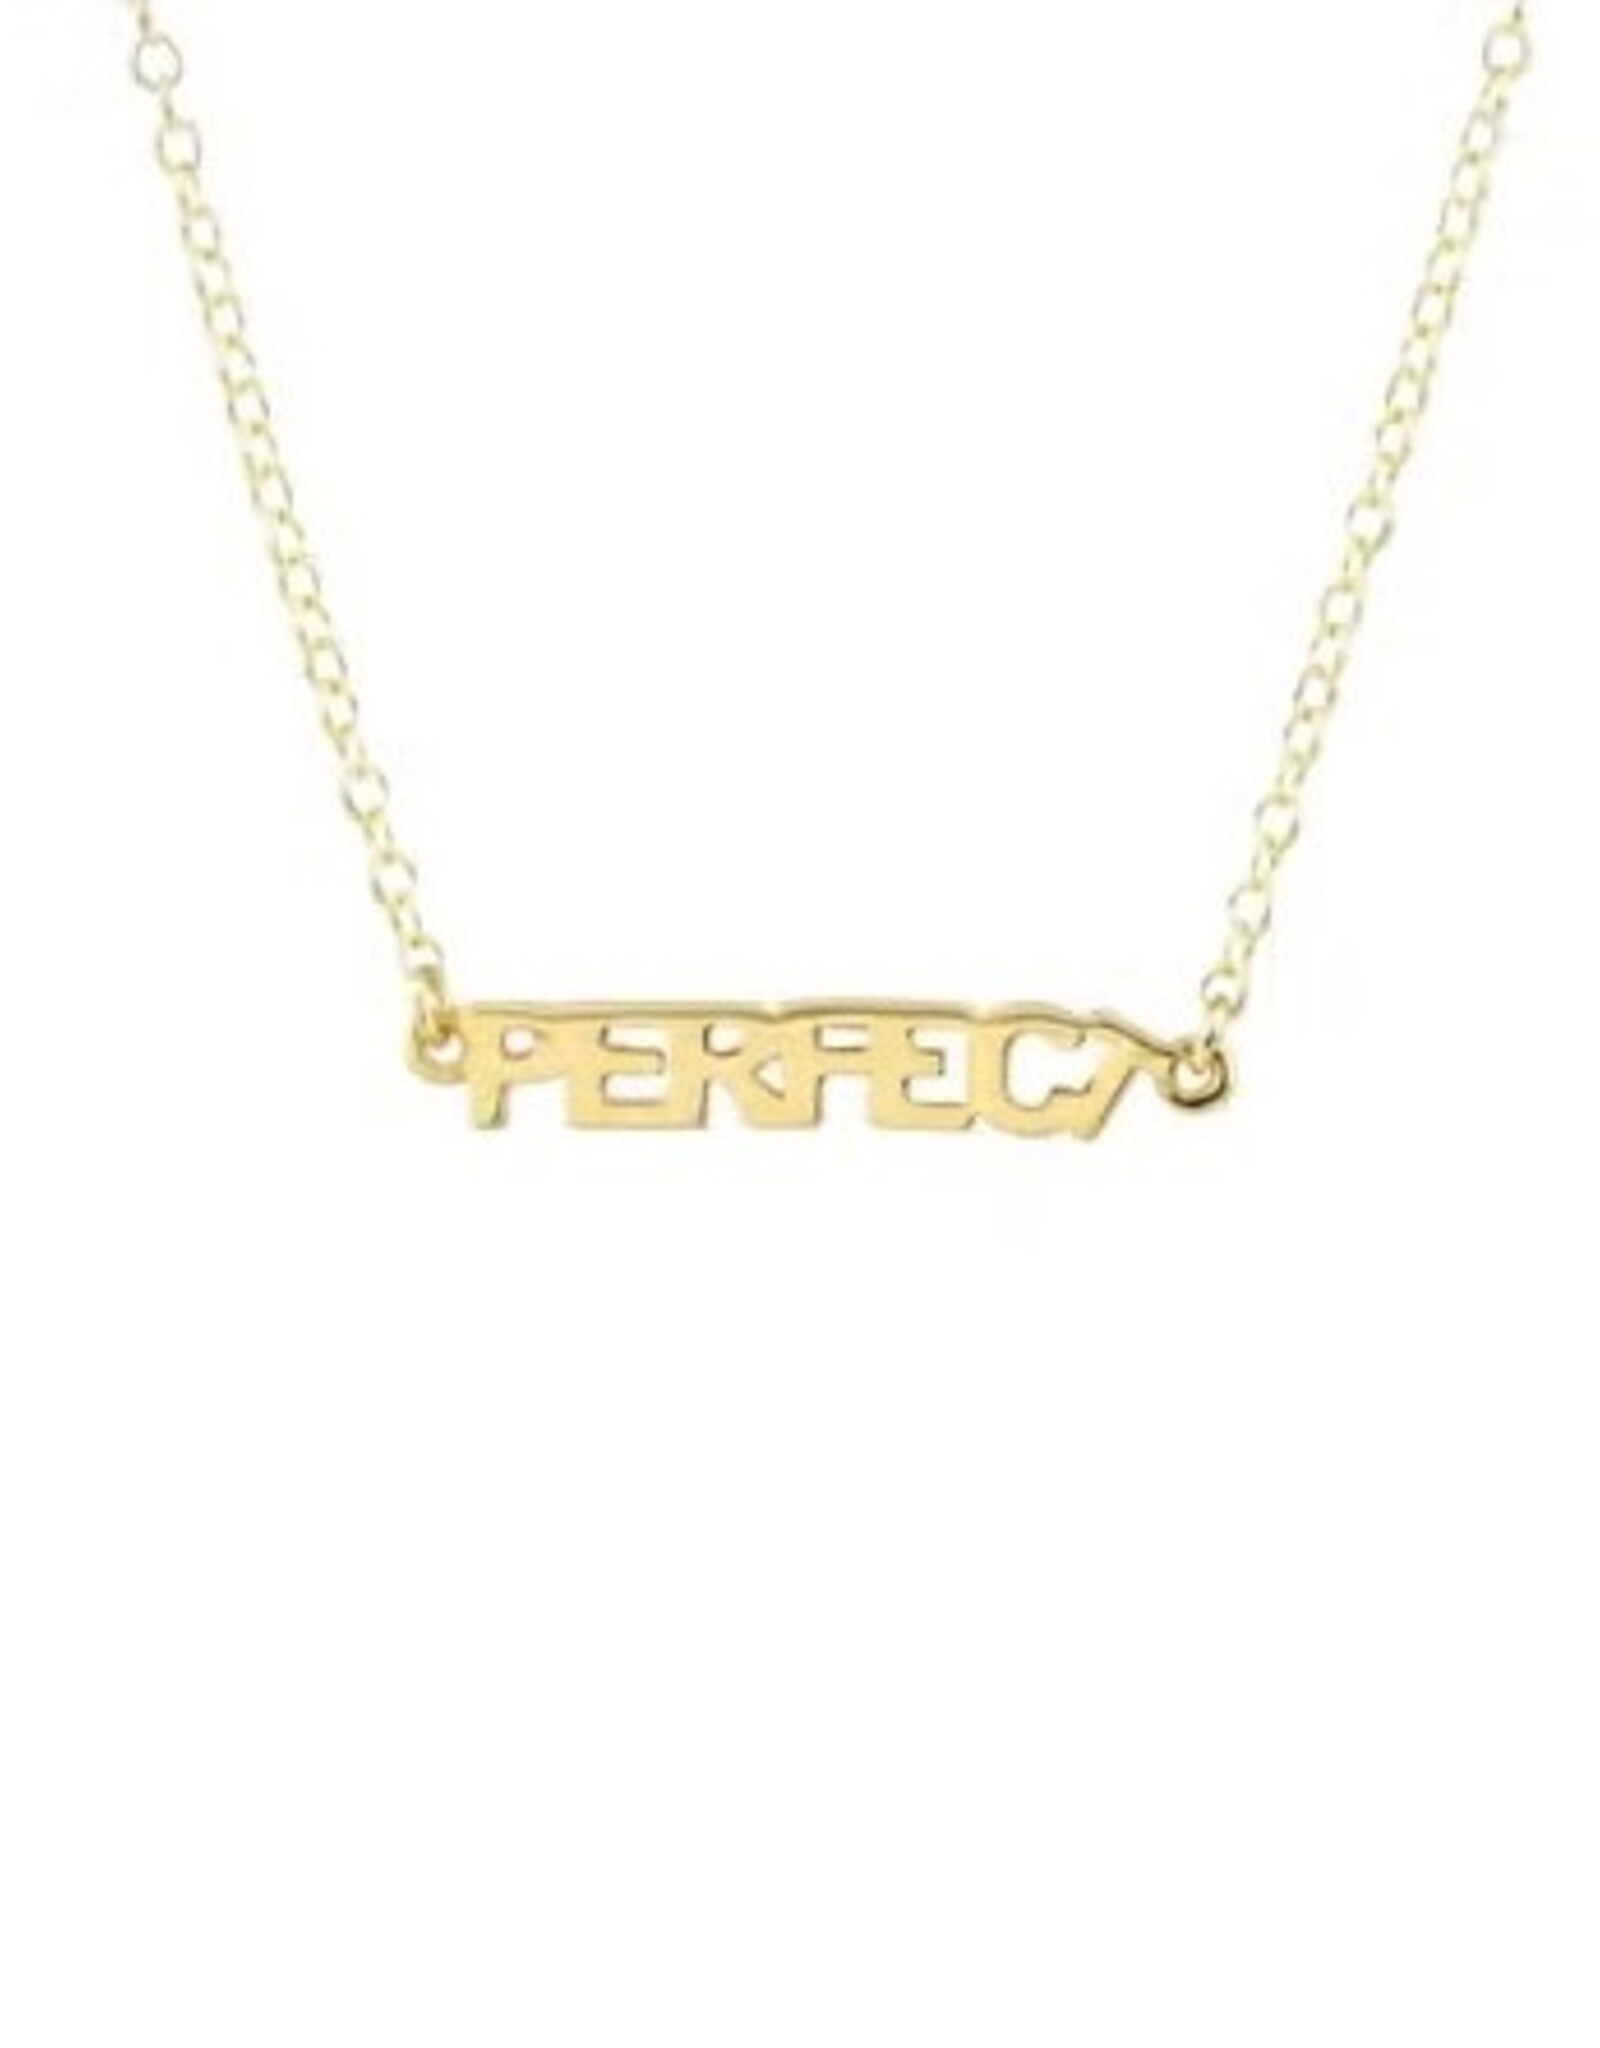 Kris Nations Necklace - Word: Perfect